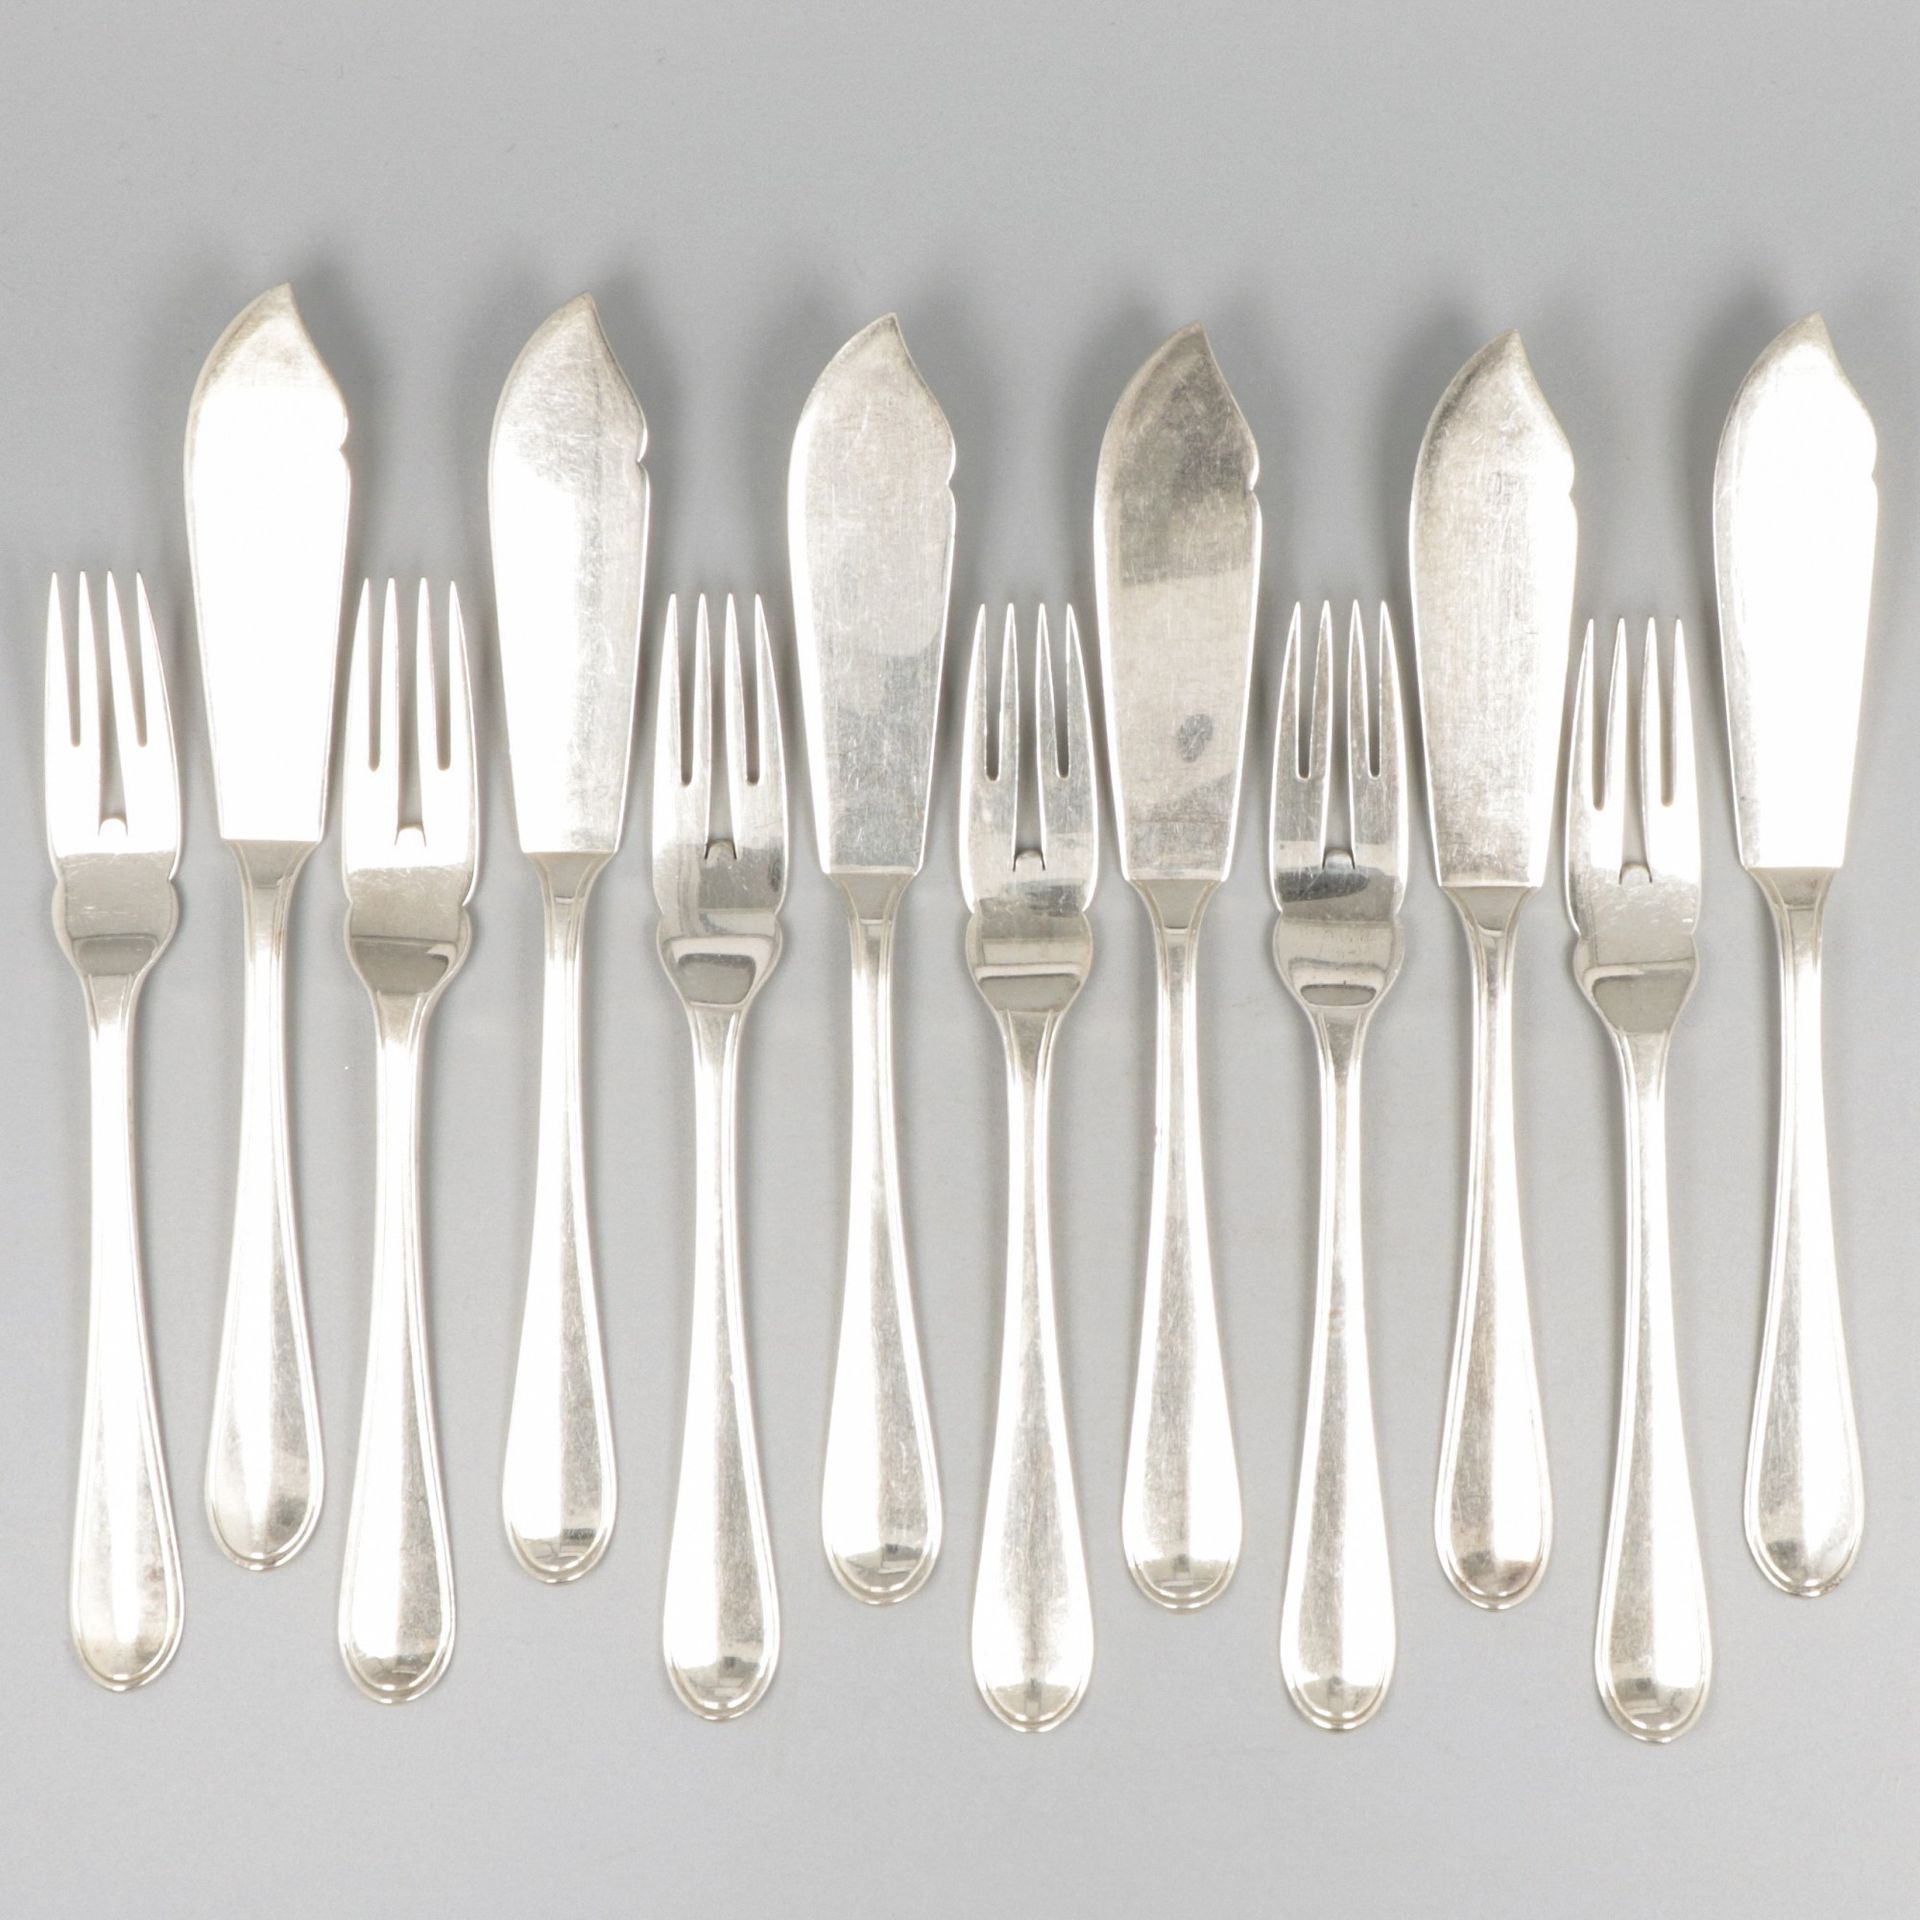 12-piece set of silver fish cutlery. "Hollands Rondfilet" o filete redondo holan&hellip;